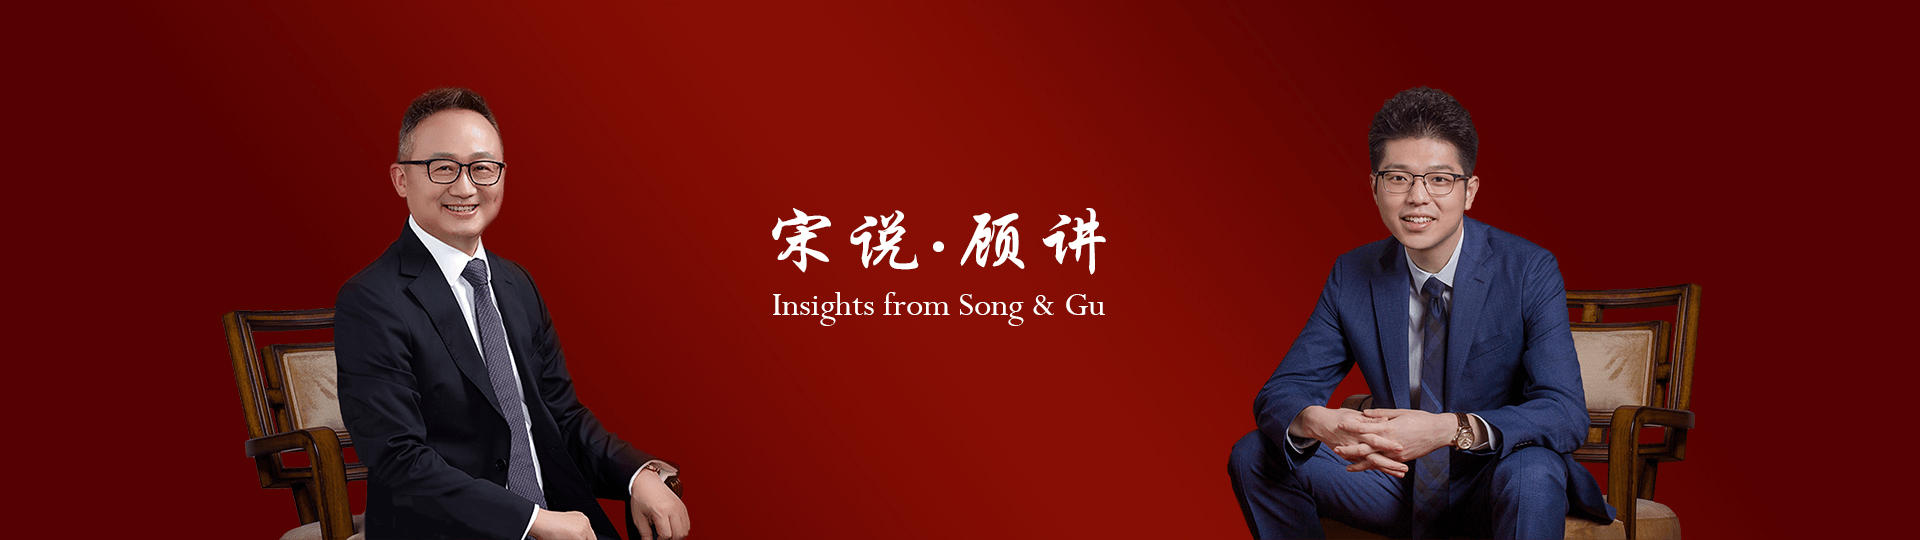 insights from song & Gu